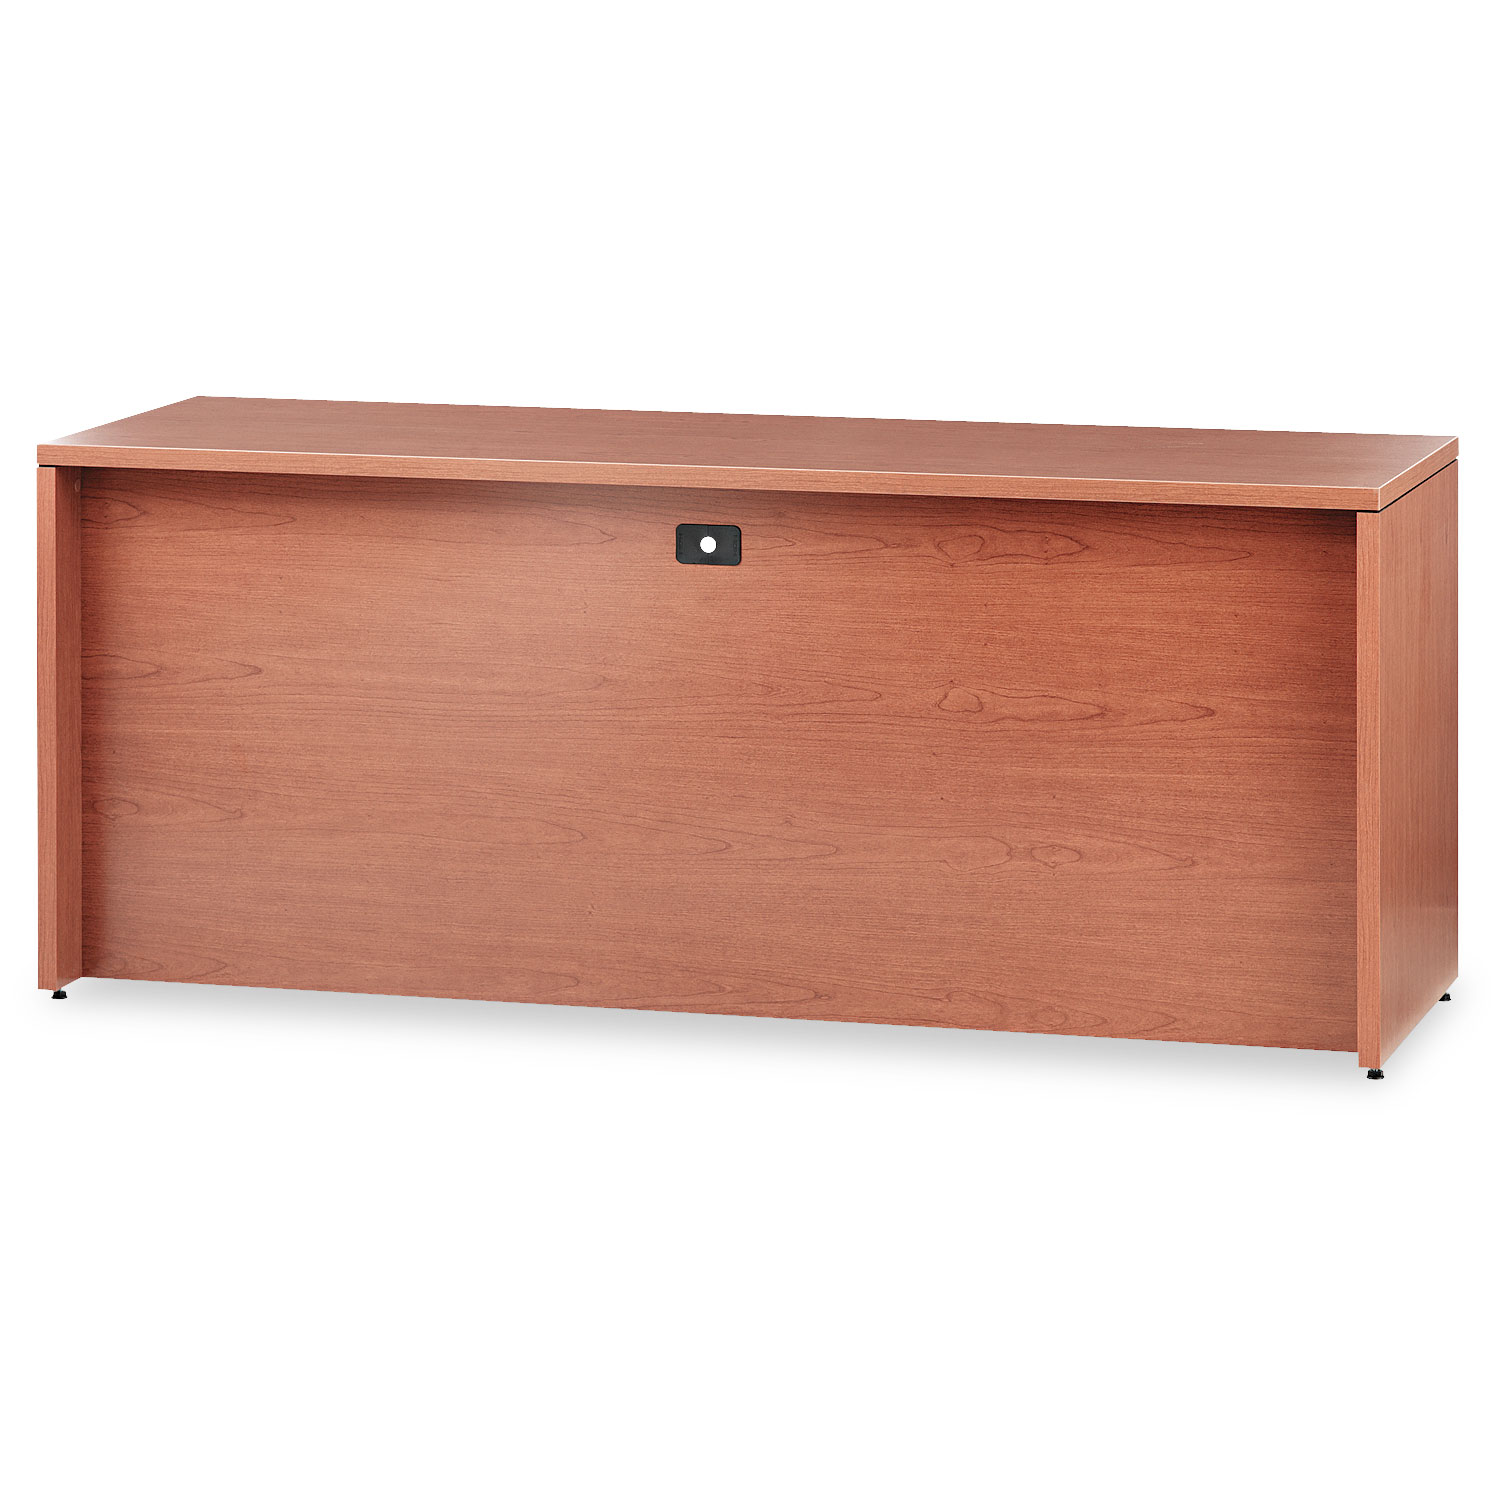 10500 Series 3/4-Height Right Pedestal Credenza, 72w x 24d x 29-1/2h, Bourbon CY